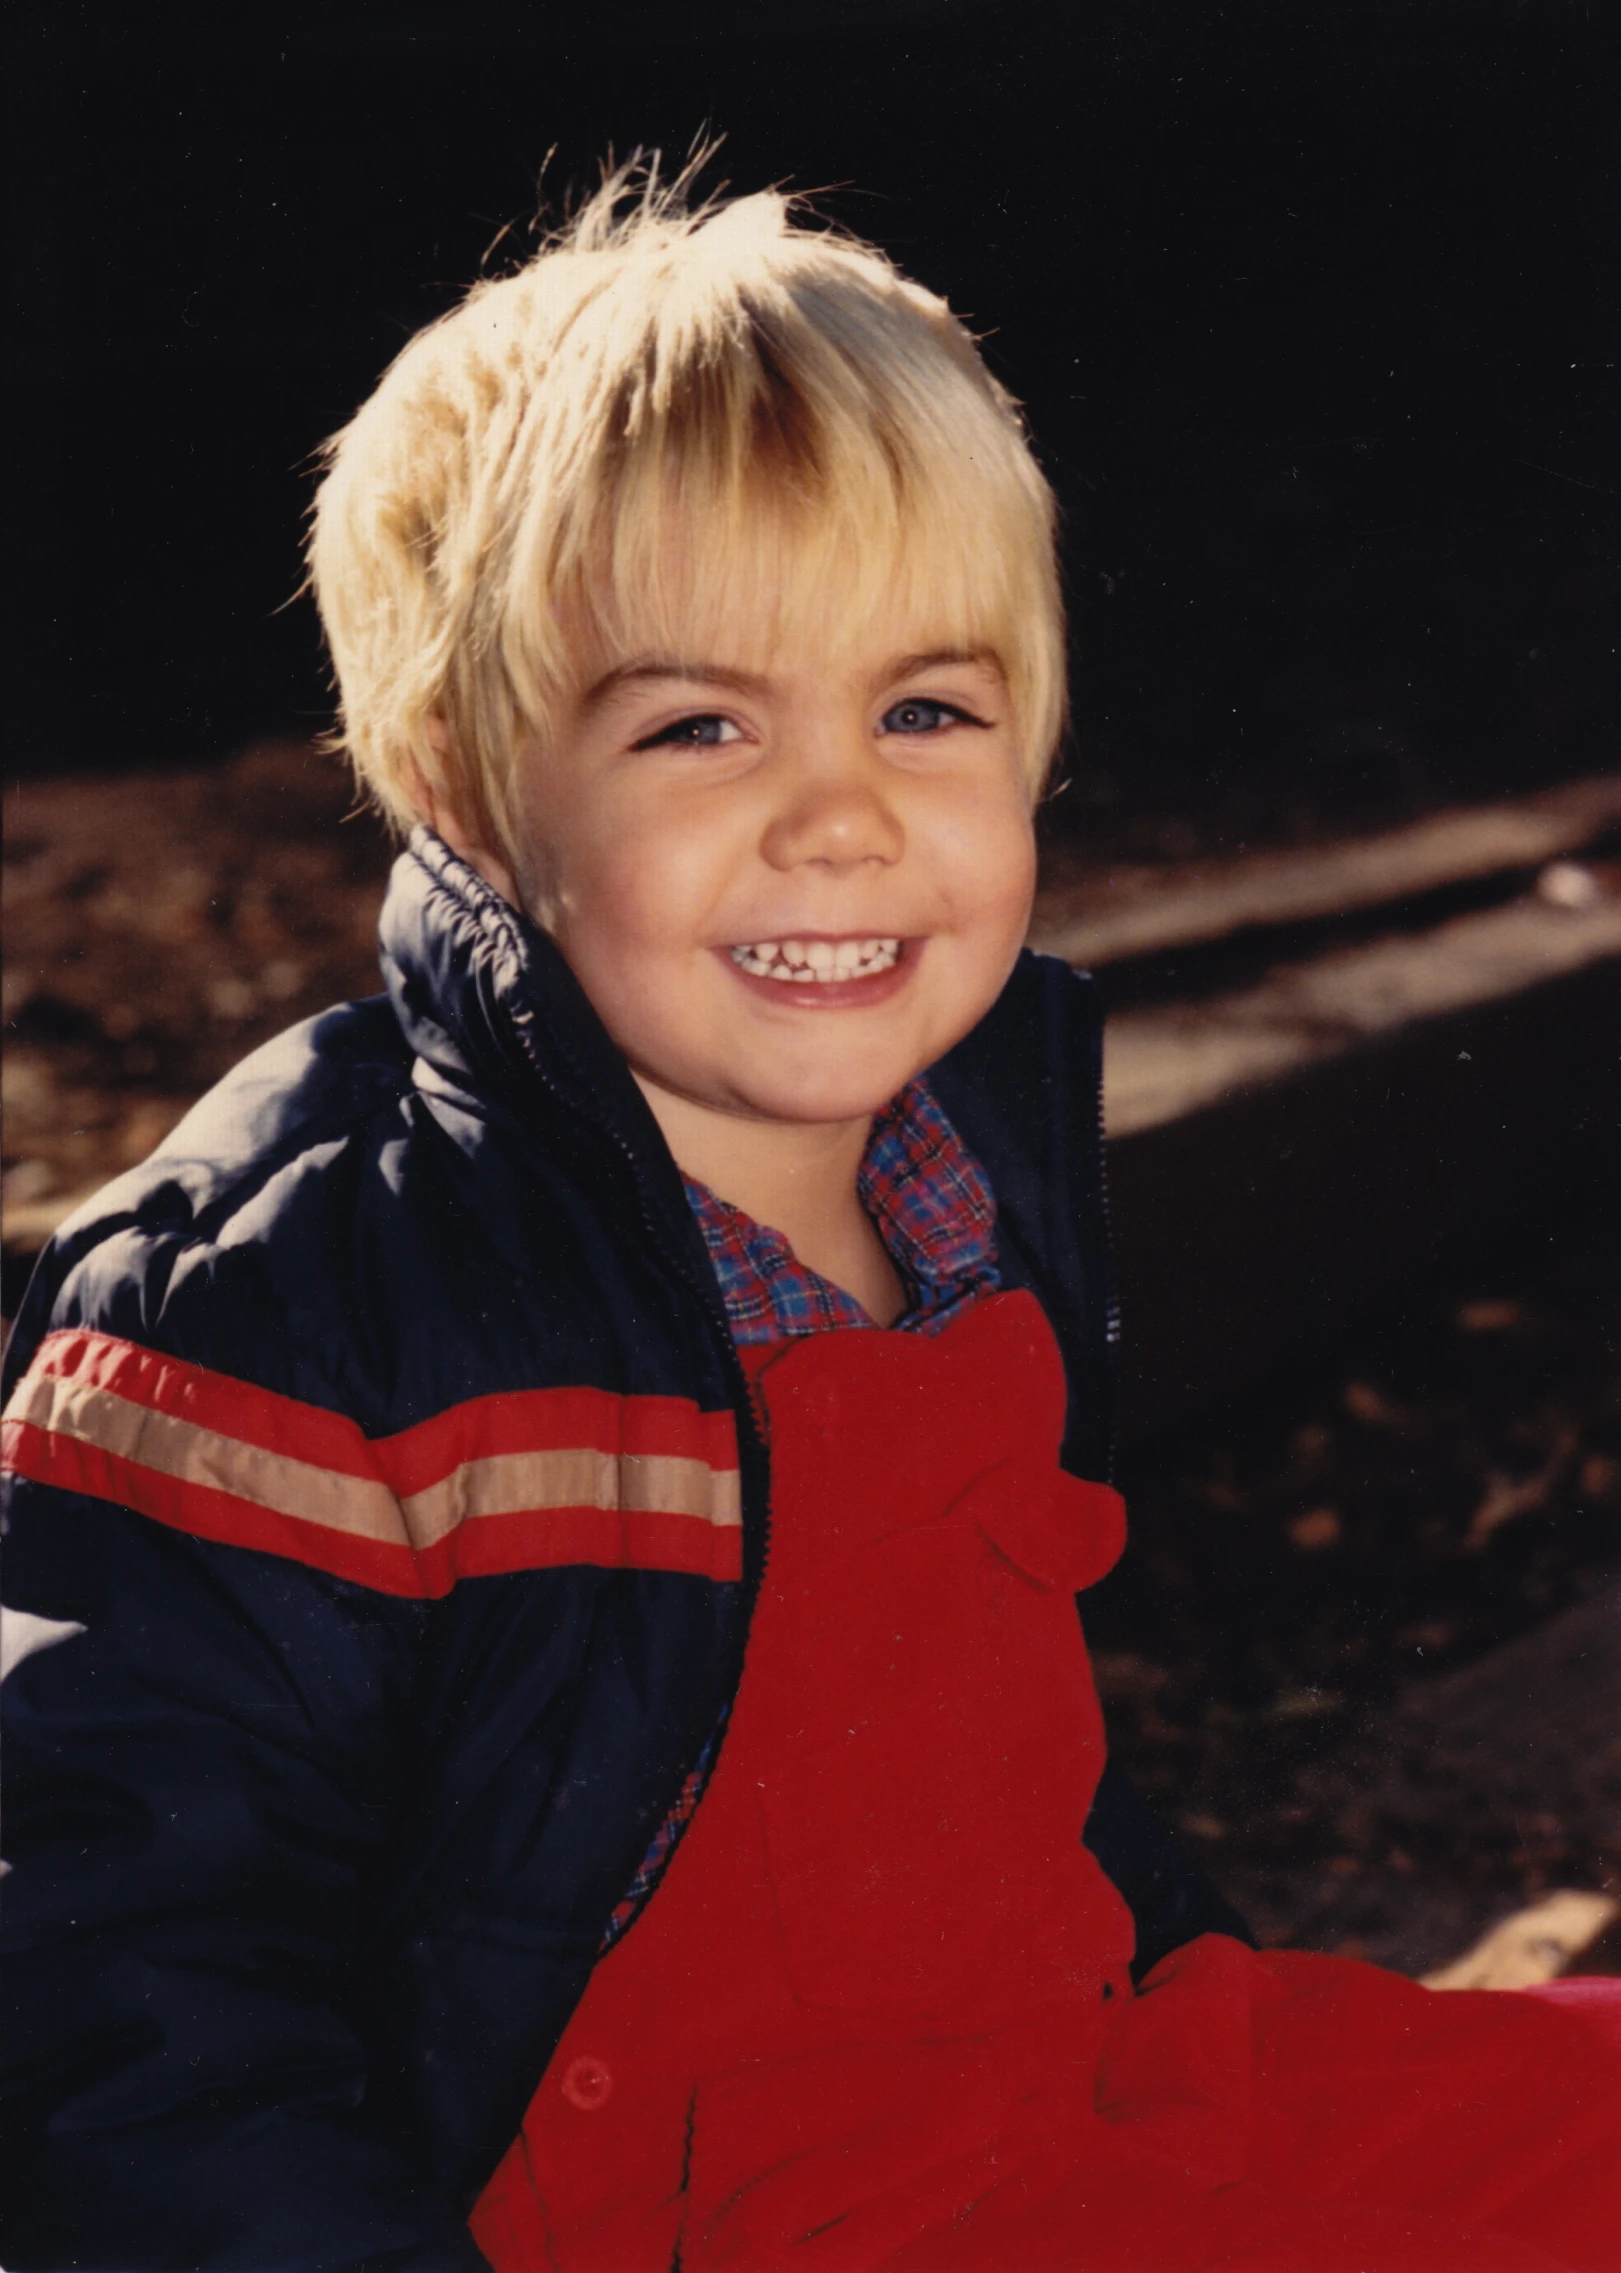 a boy wearing red and blue is smiling at the camera